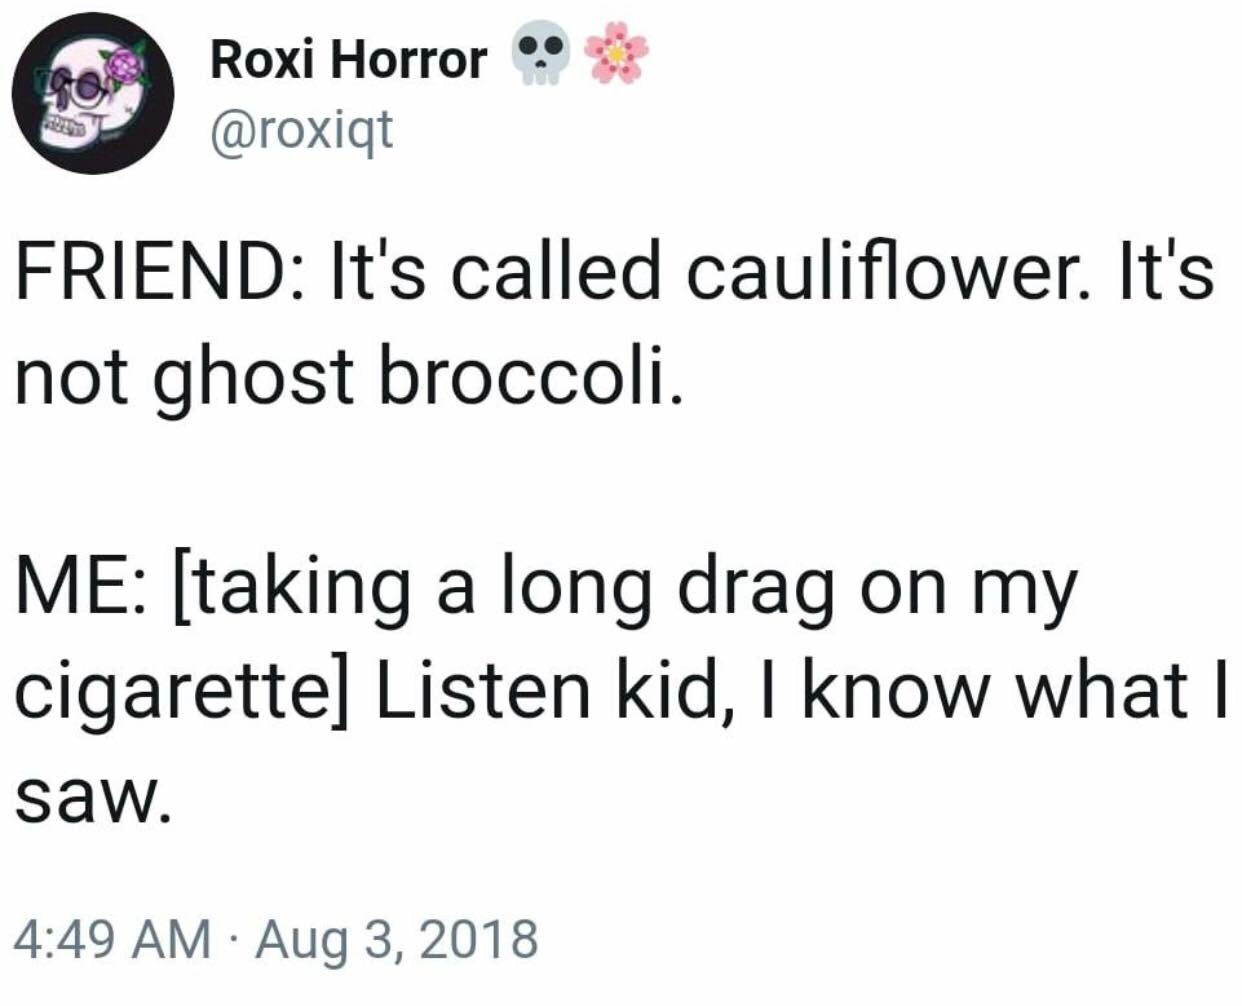 ghost broccoli - Roxi Horror Friend It's called cauliflower. It's not ghost broccoli. Me taking a long drag on my cigarette Listen kid, I know what I saw.